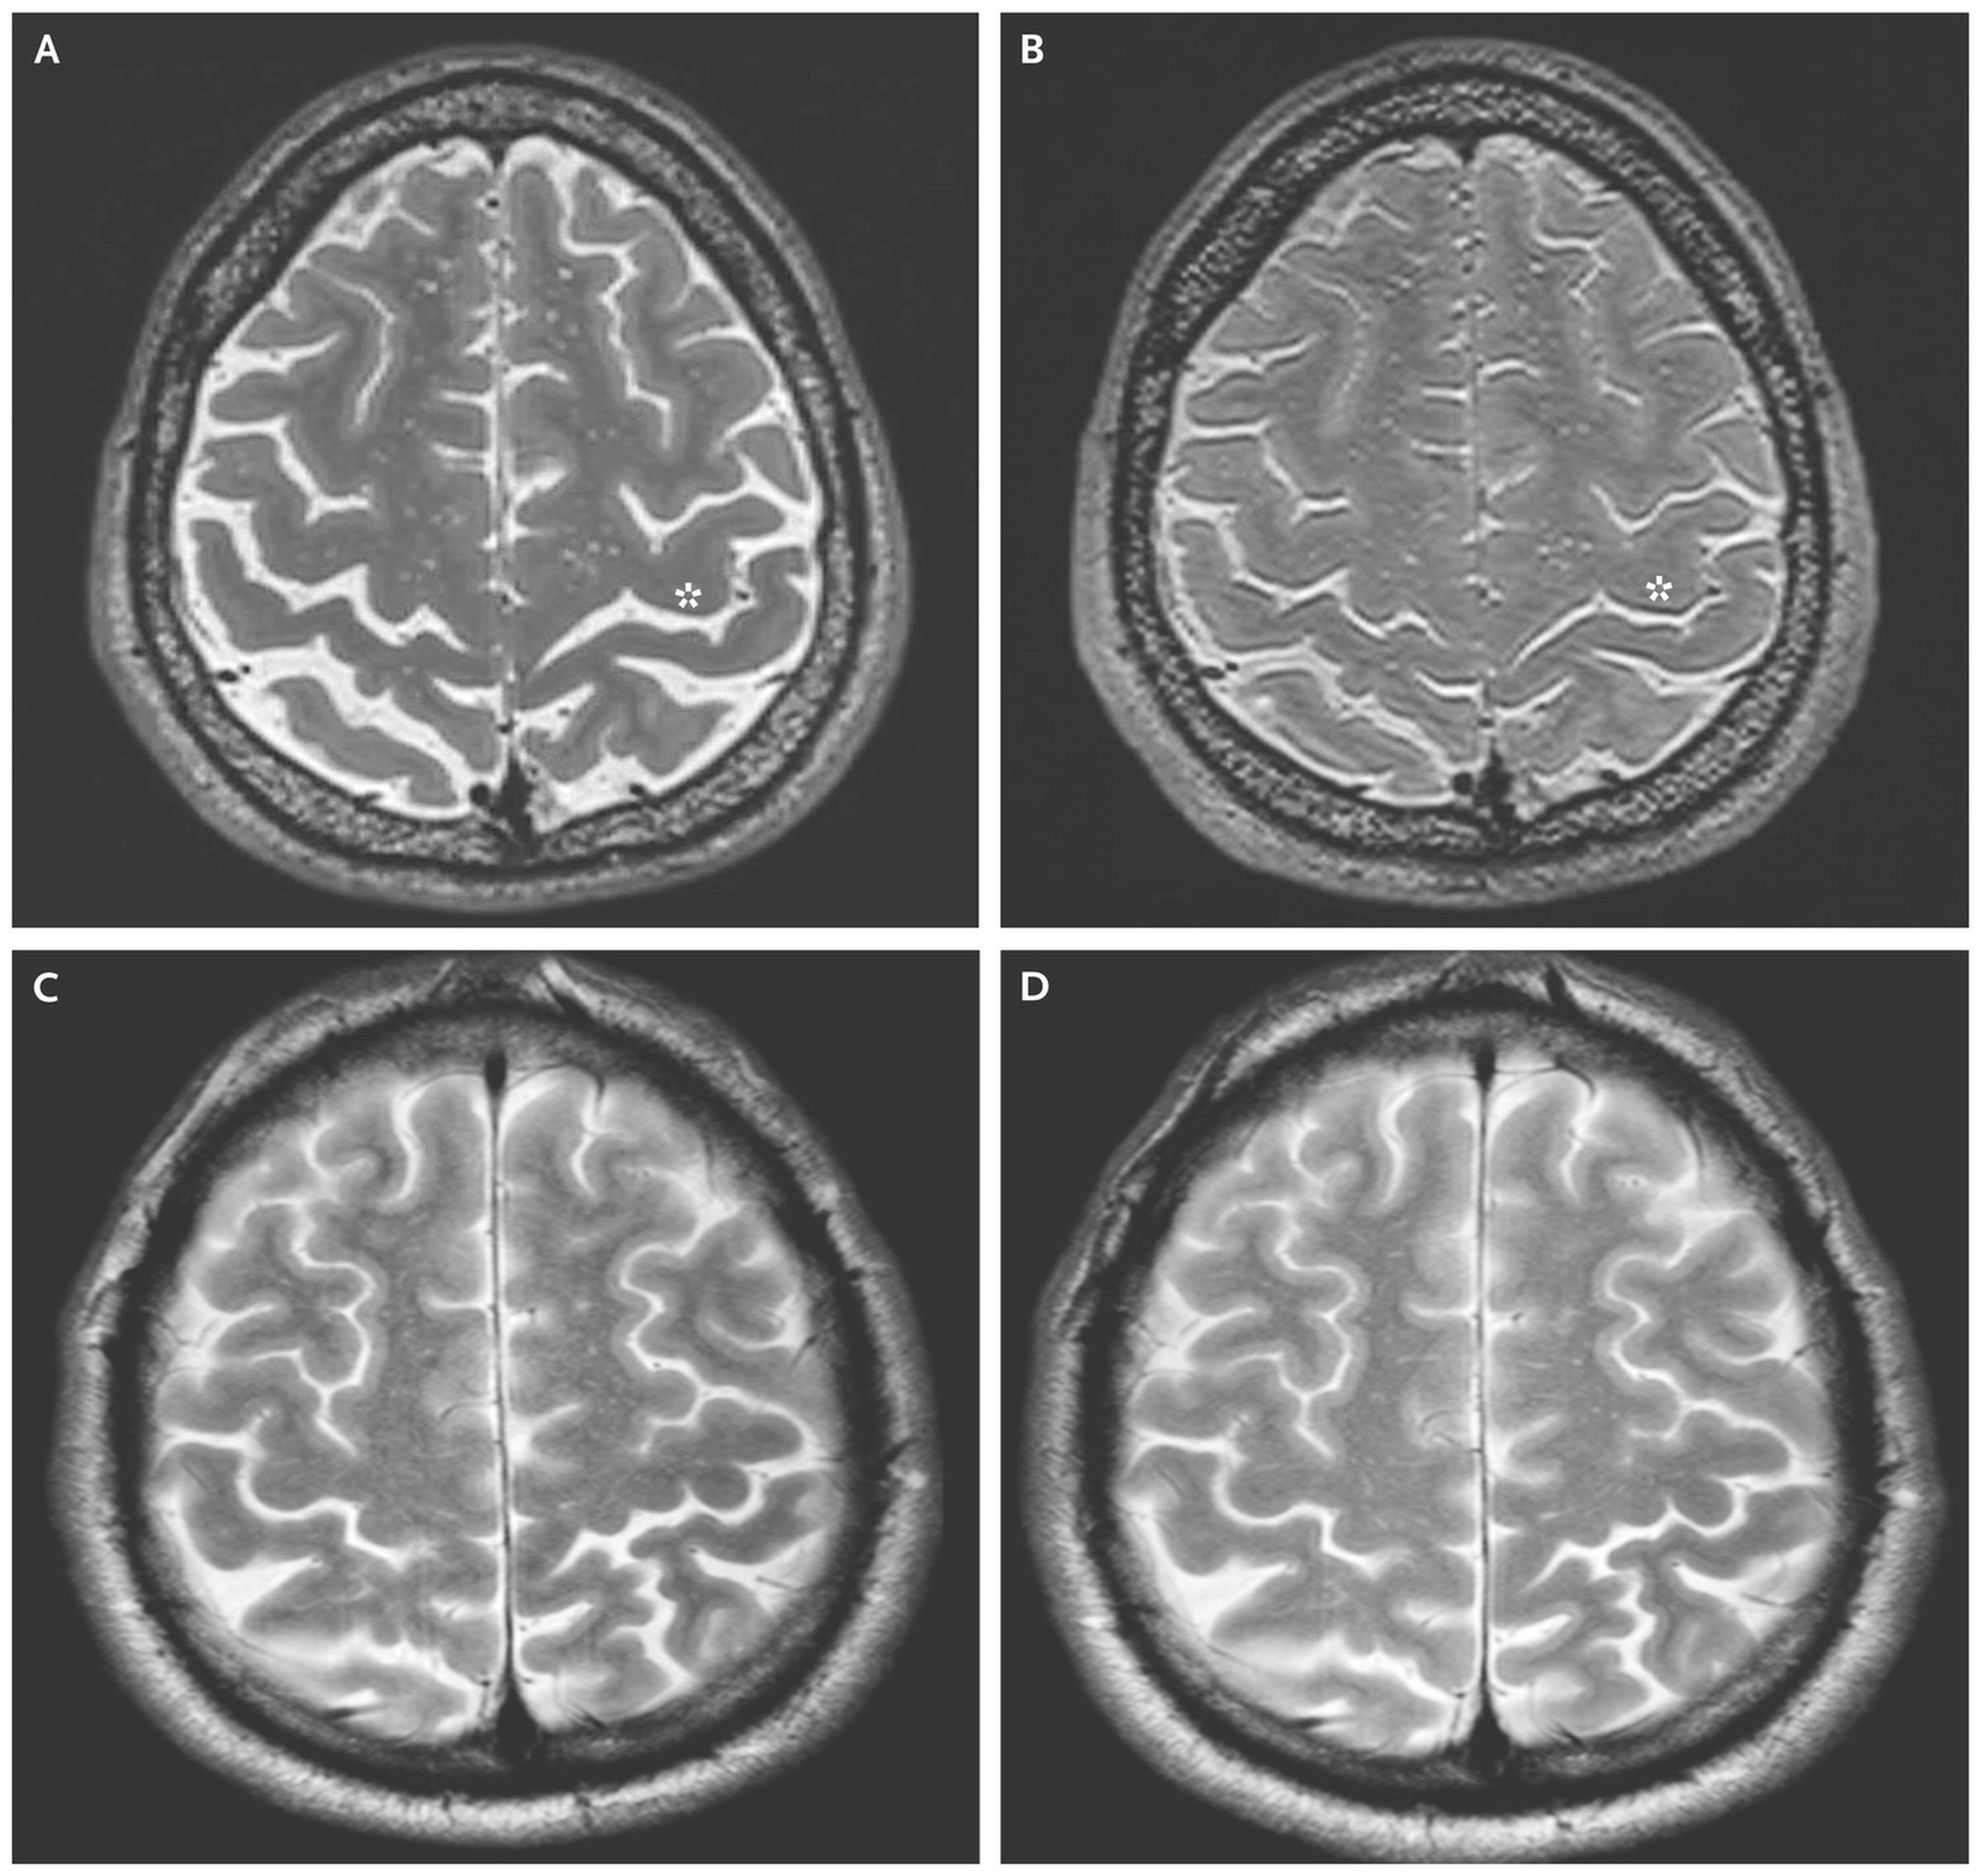 Brain images taken before and after spaceflight. Panels A and B show the before and after MRI scans from a long-duration spaceflight astronaut. Panels C and D show the before and after scans of a short-duration spaceflight astronaut.